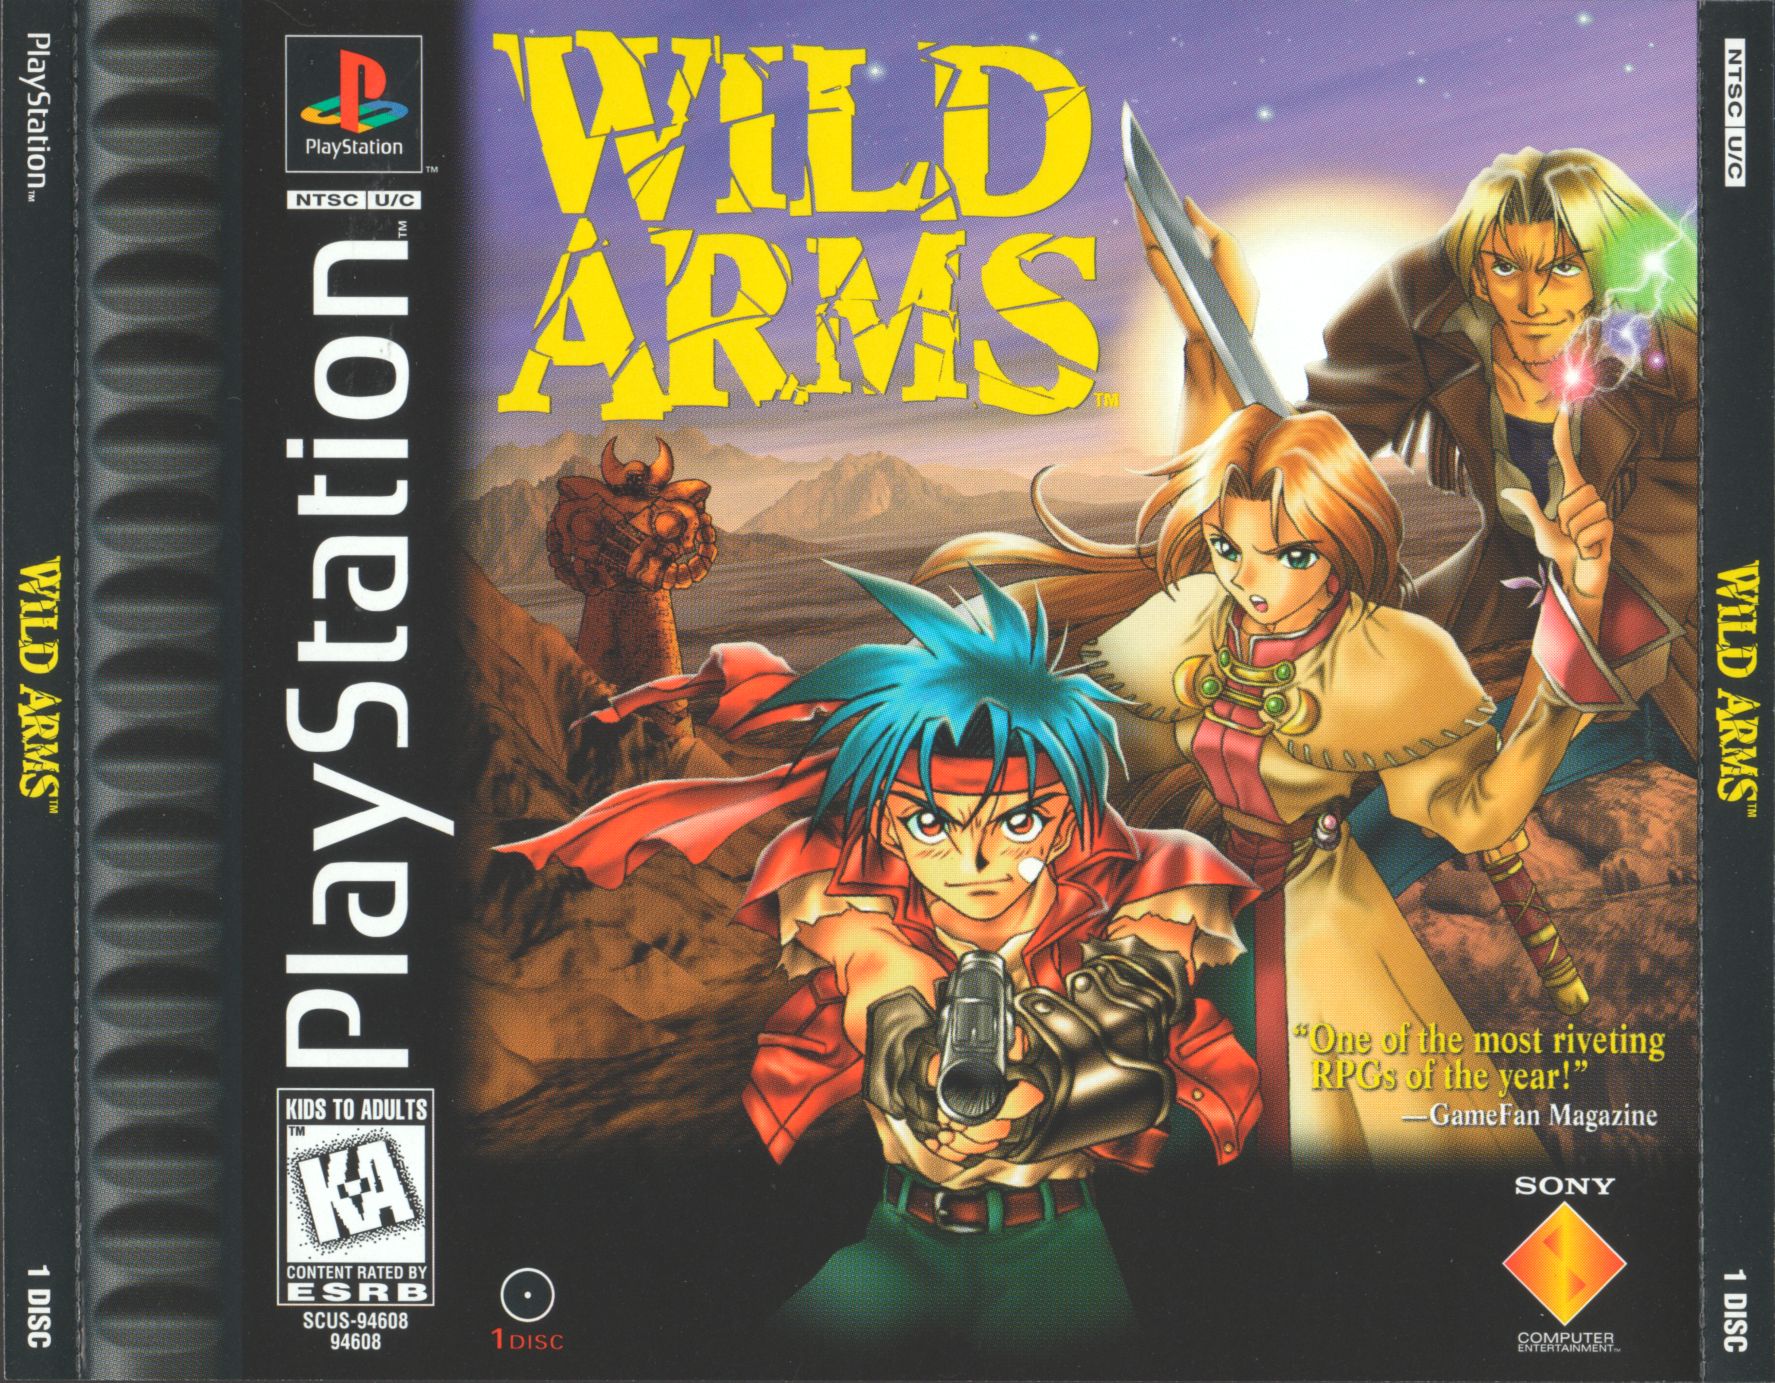 1 вилд. Wild Arms ps1. Wild Arms 2 ps1. Wild Arms 2 PLAYSTATION 1. Wild Arms ps2.